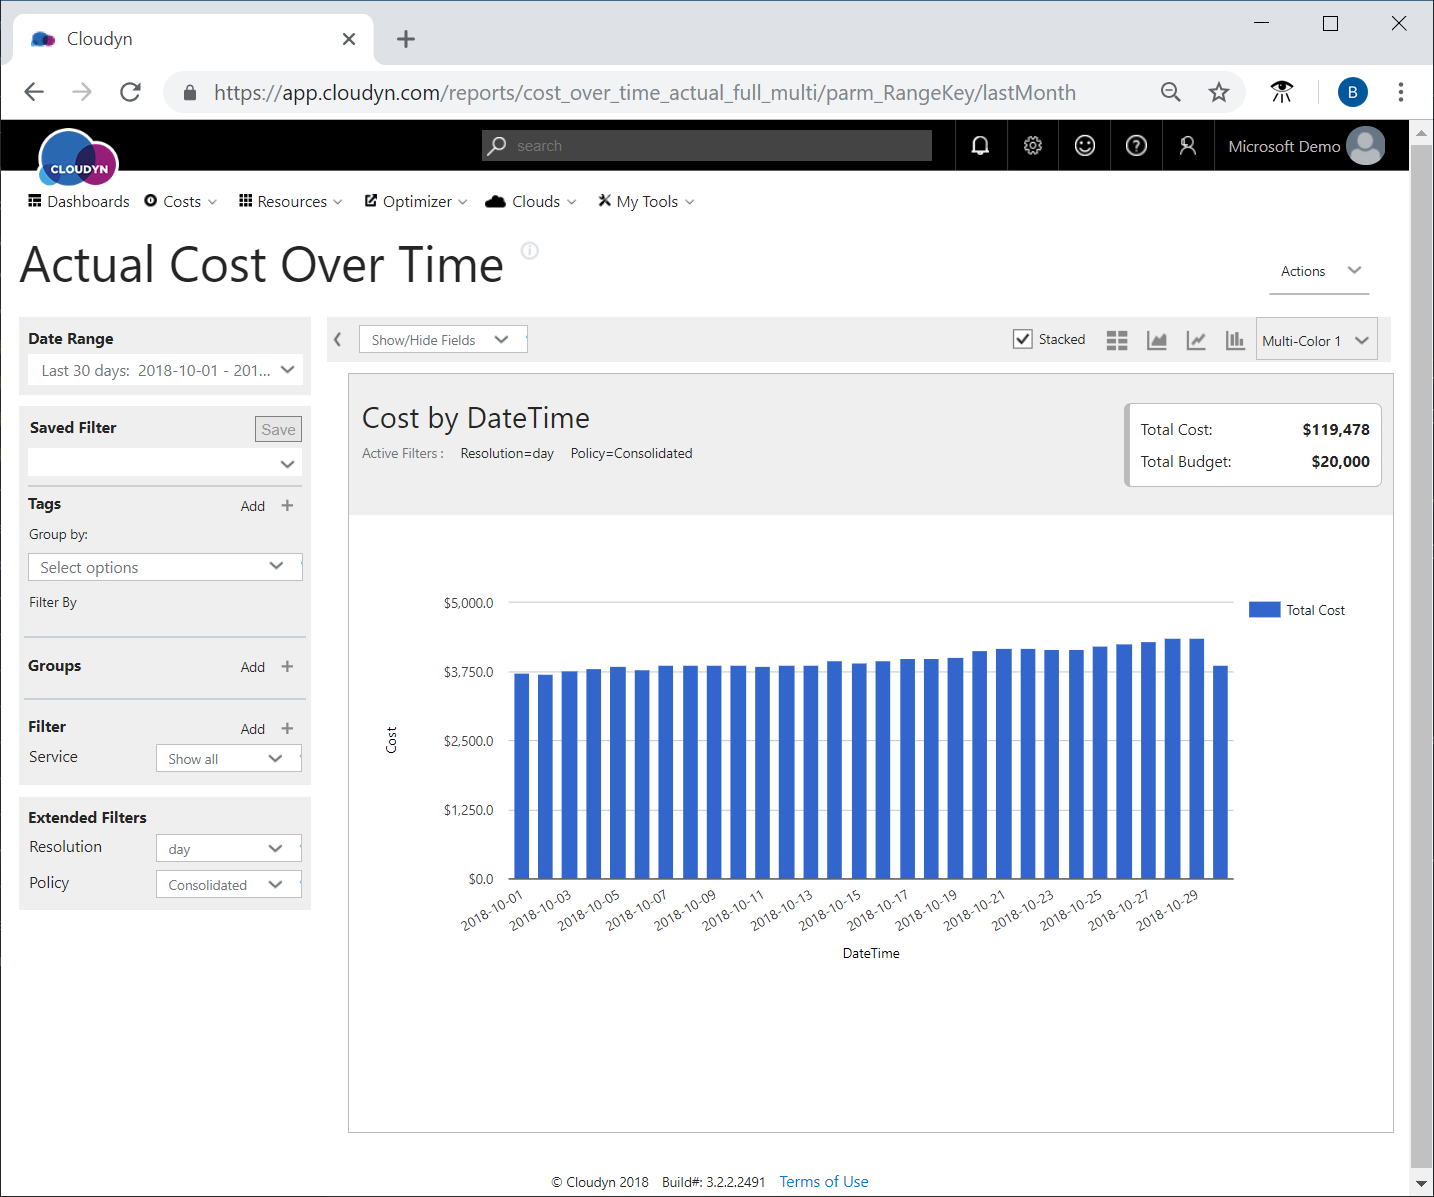 Example Actual Cost Over Time report